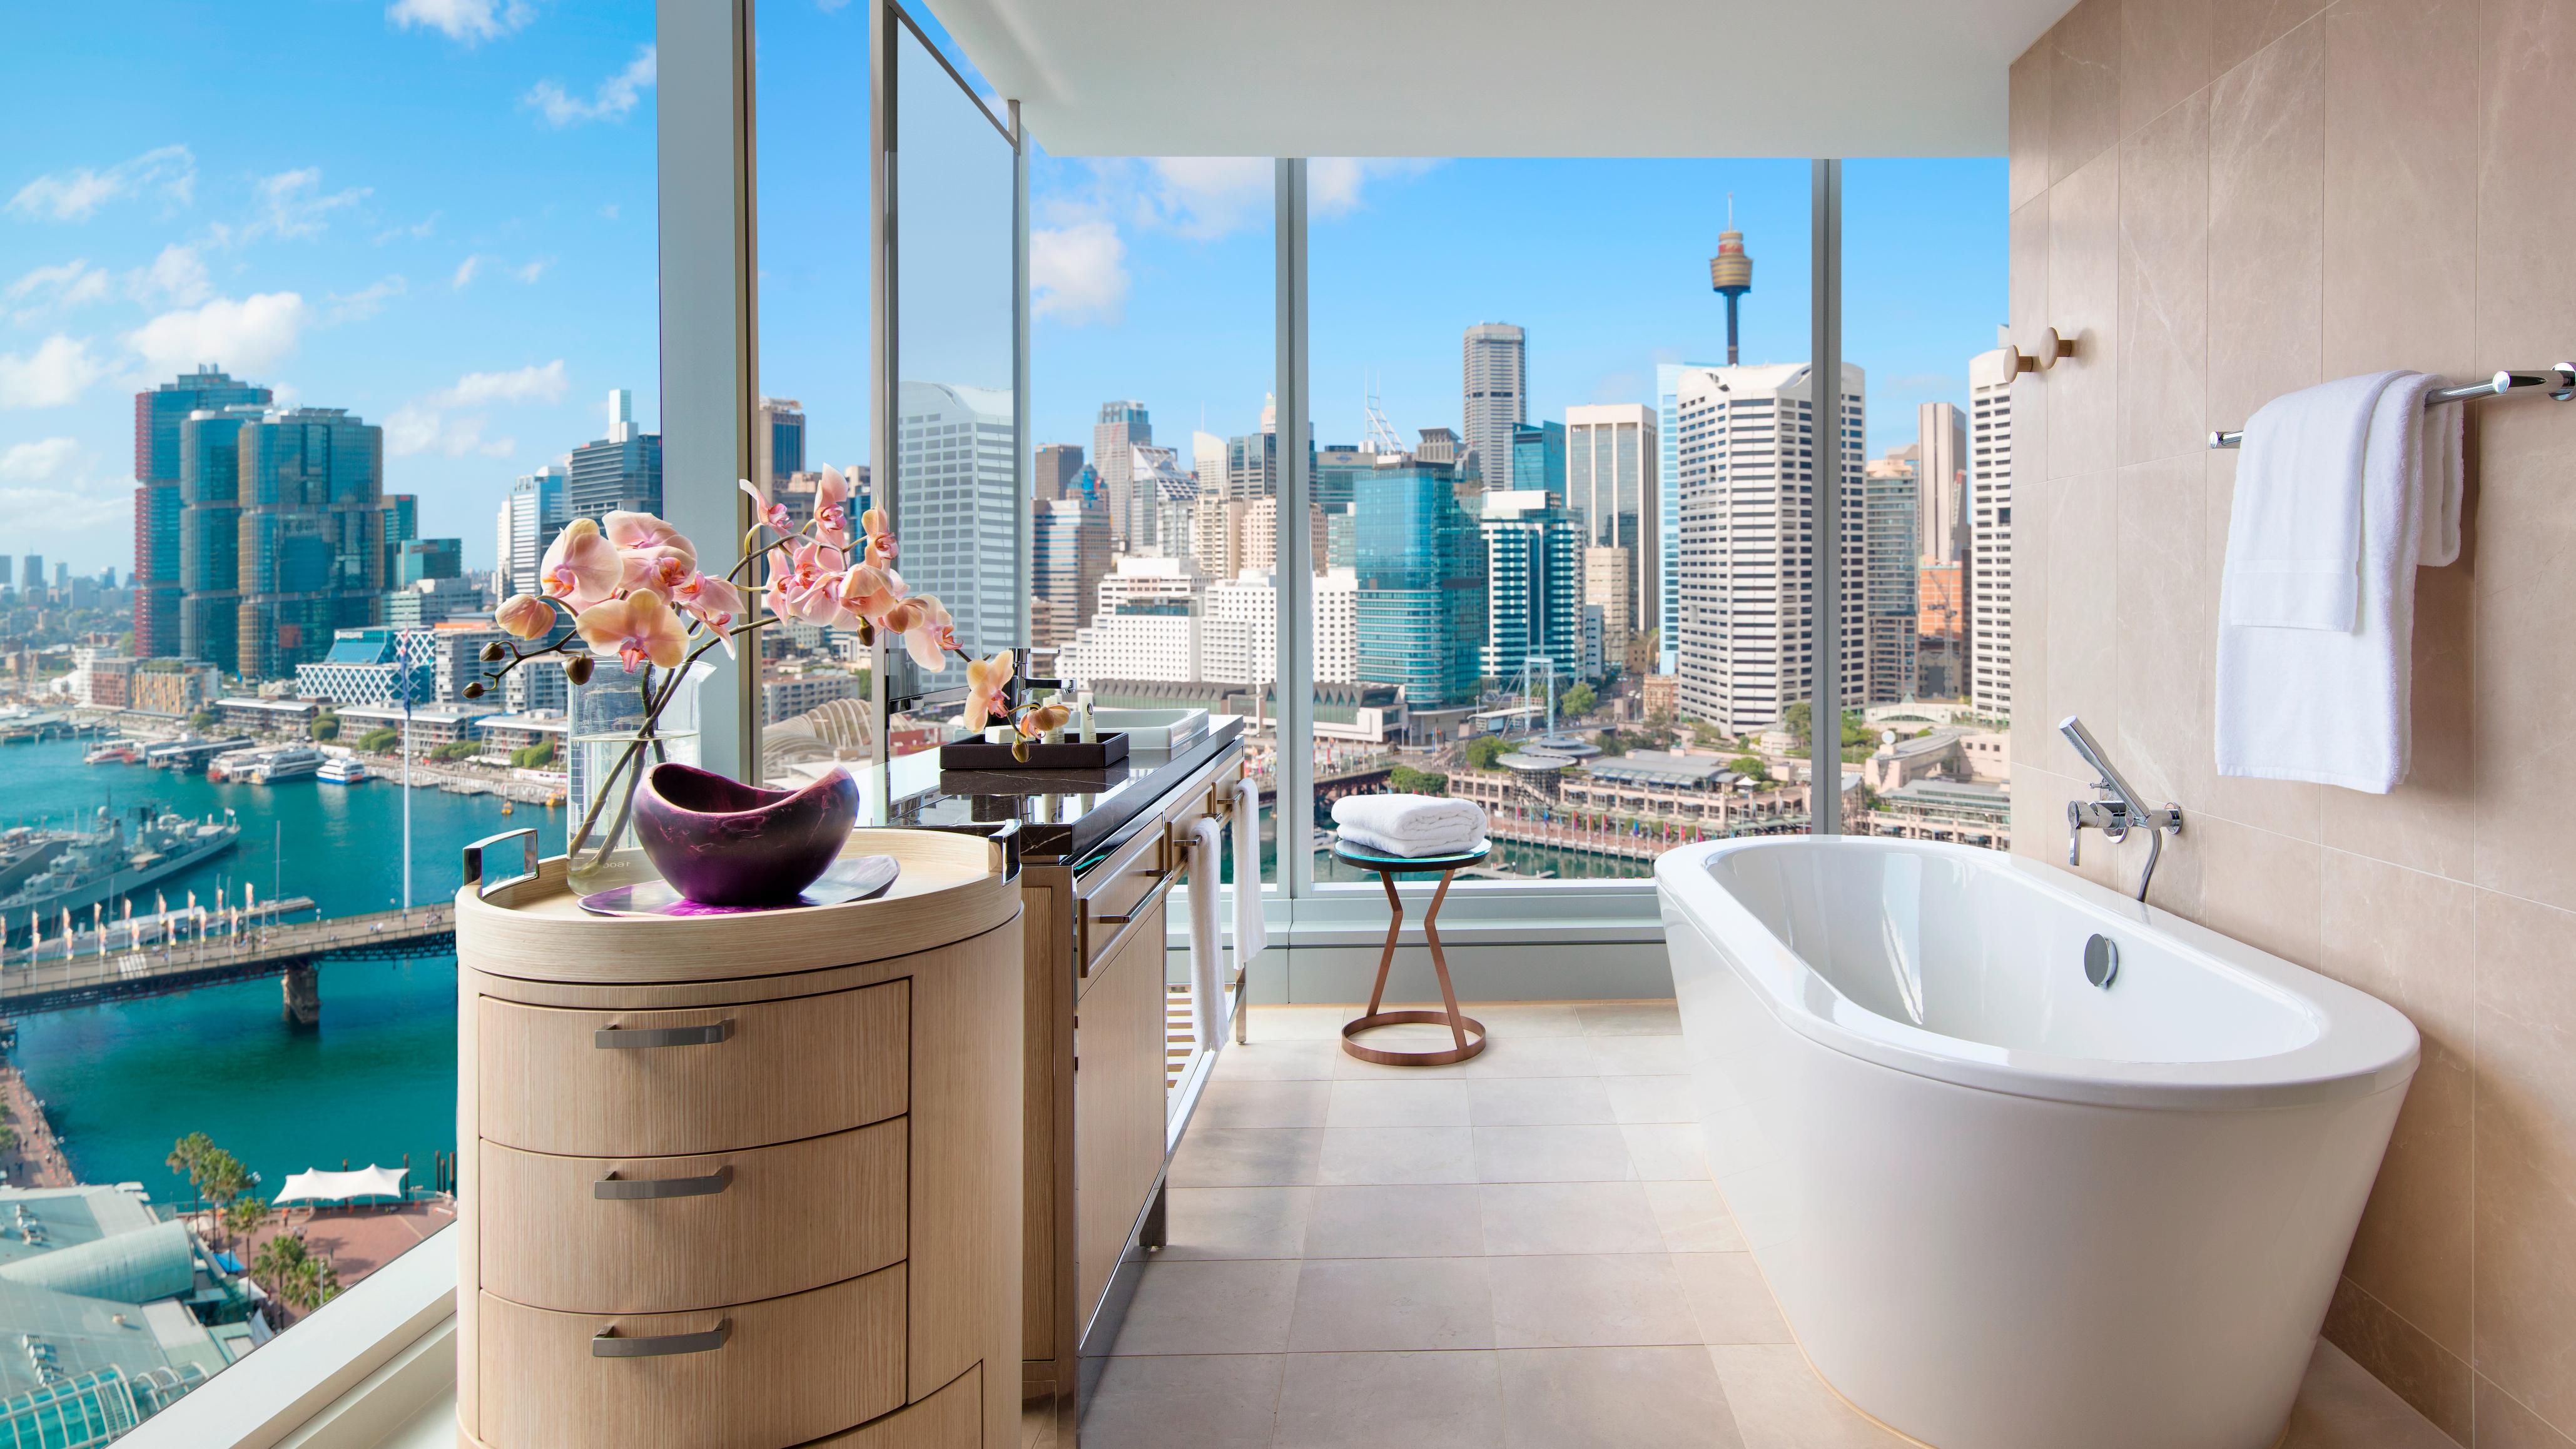 Hotel Bathtubs With Jaw Dropping Views, Which Brand Of Bathtub Is Best